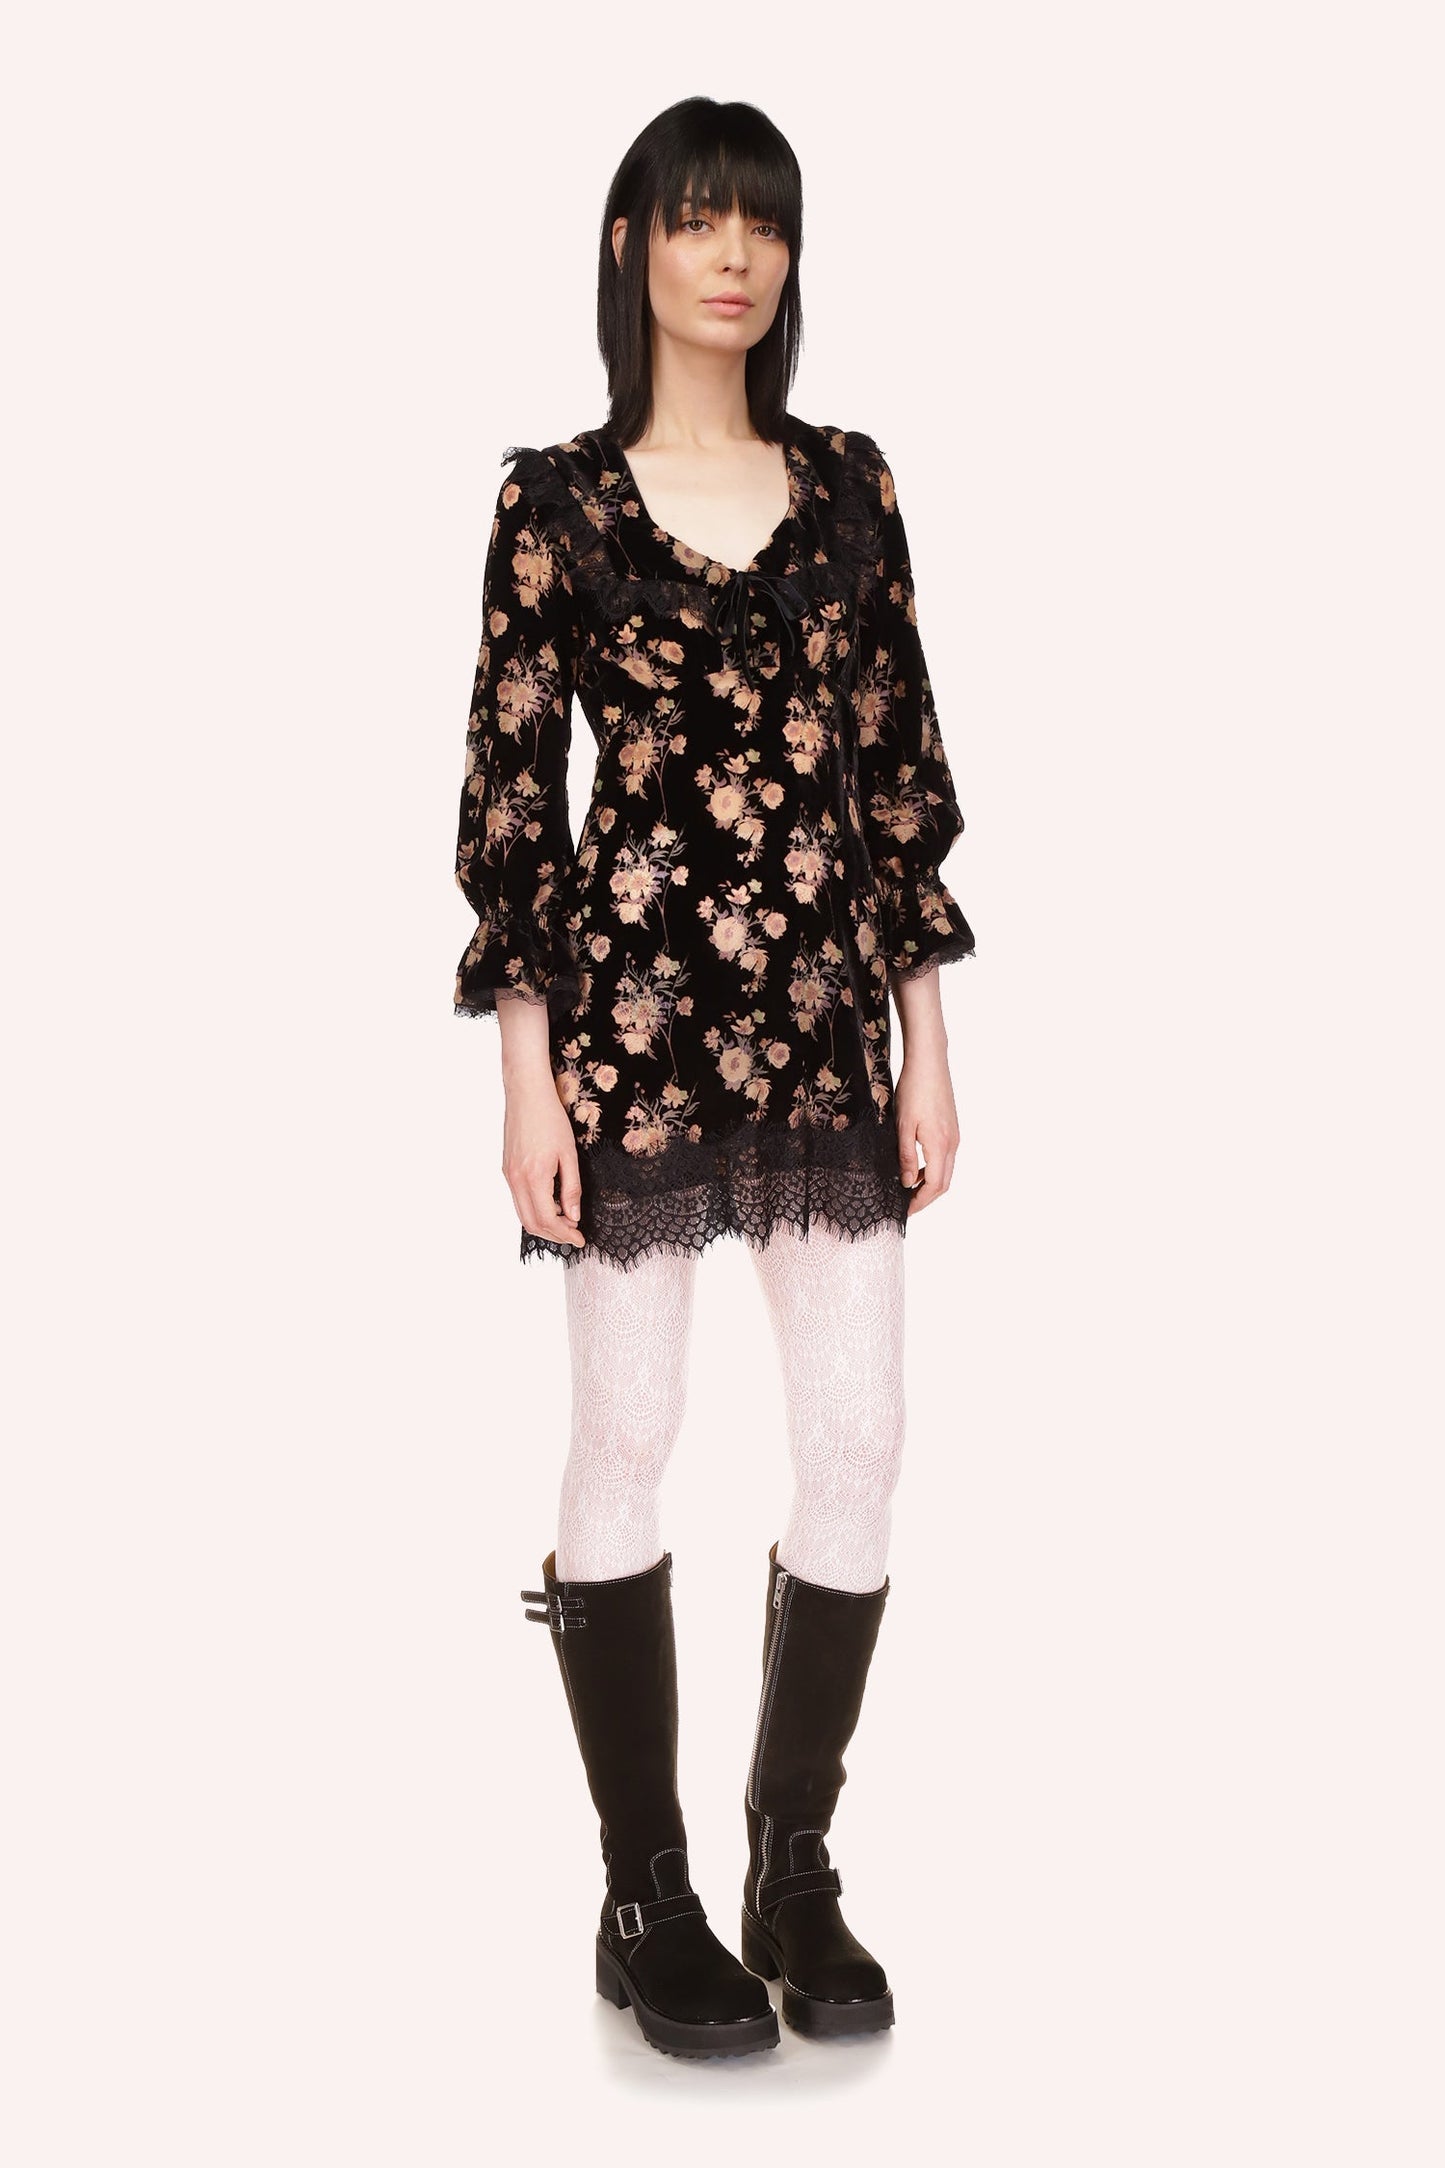 Floral dress with V-neck collar, black lace accents, and long sleeves on black background